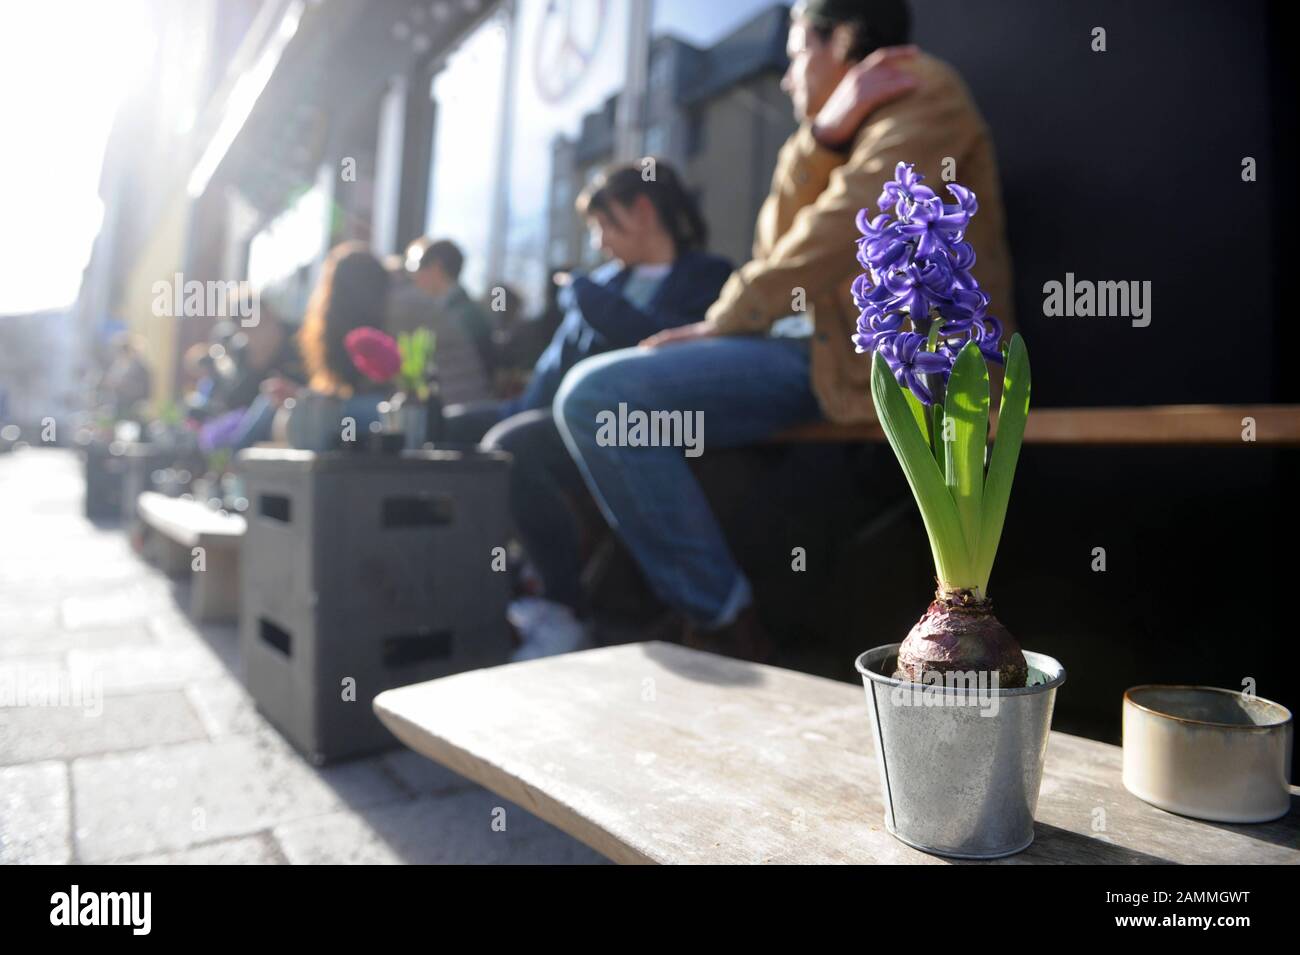 On a mild winter day, guests sit outside in front of the 'Aroma Kaffeebar' on Pestalozzistraße in the Glockenbach district. [automated translation] Stock Photo